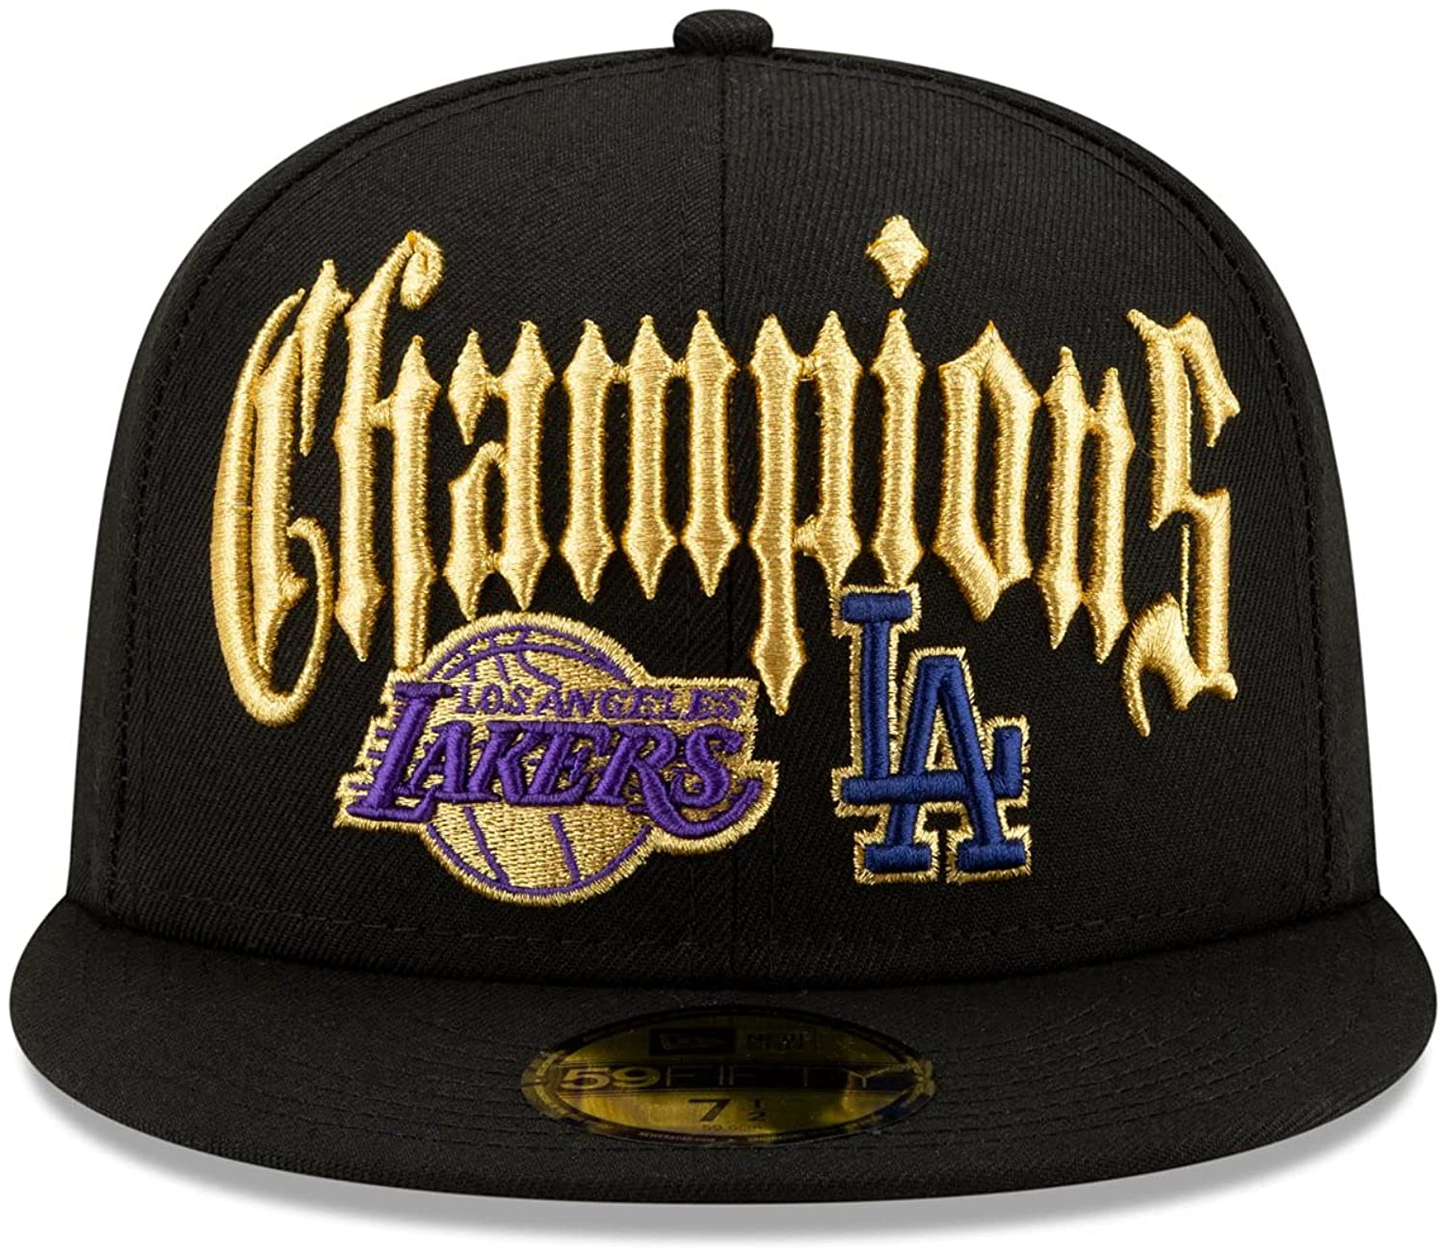 New Era 59FIFTY LA Los Angeles Dodgers Lakers Dual Champions Split 2020 Championships Black Gold Fitted Cap